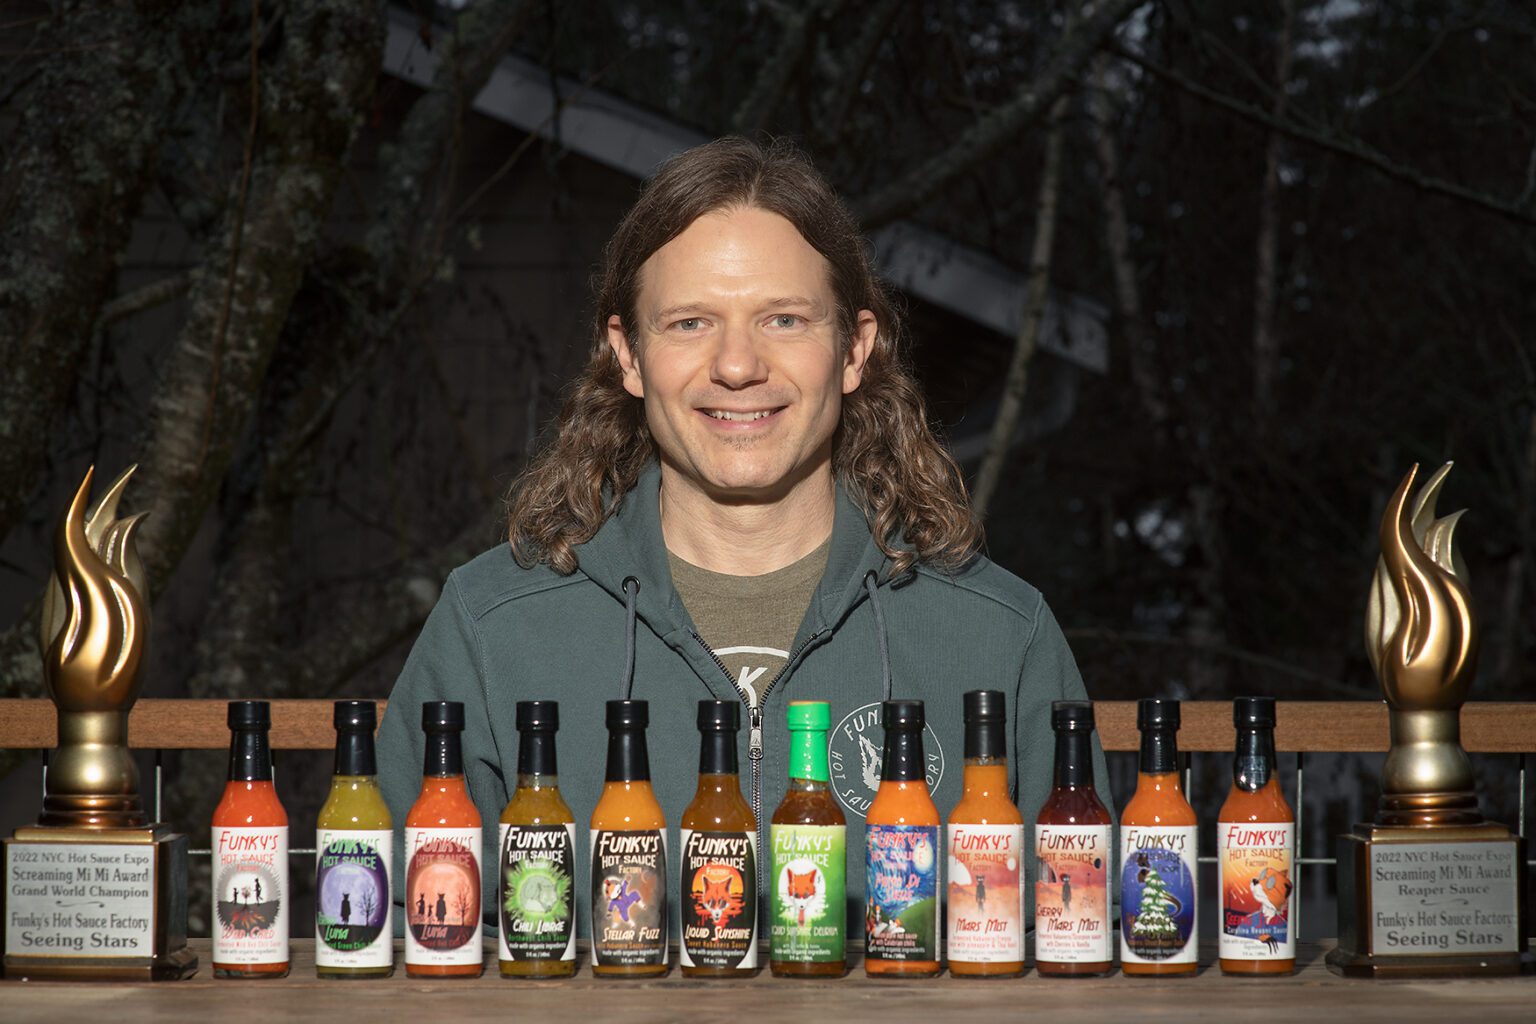 Matthew Mini smiling for the camera as he is posed behind the rows of hot sauce made by him.